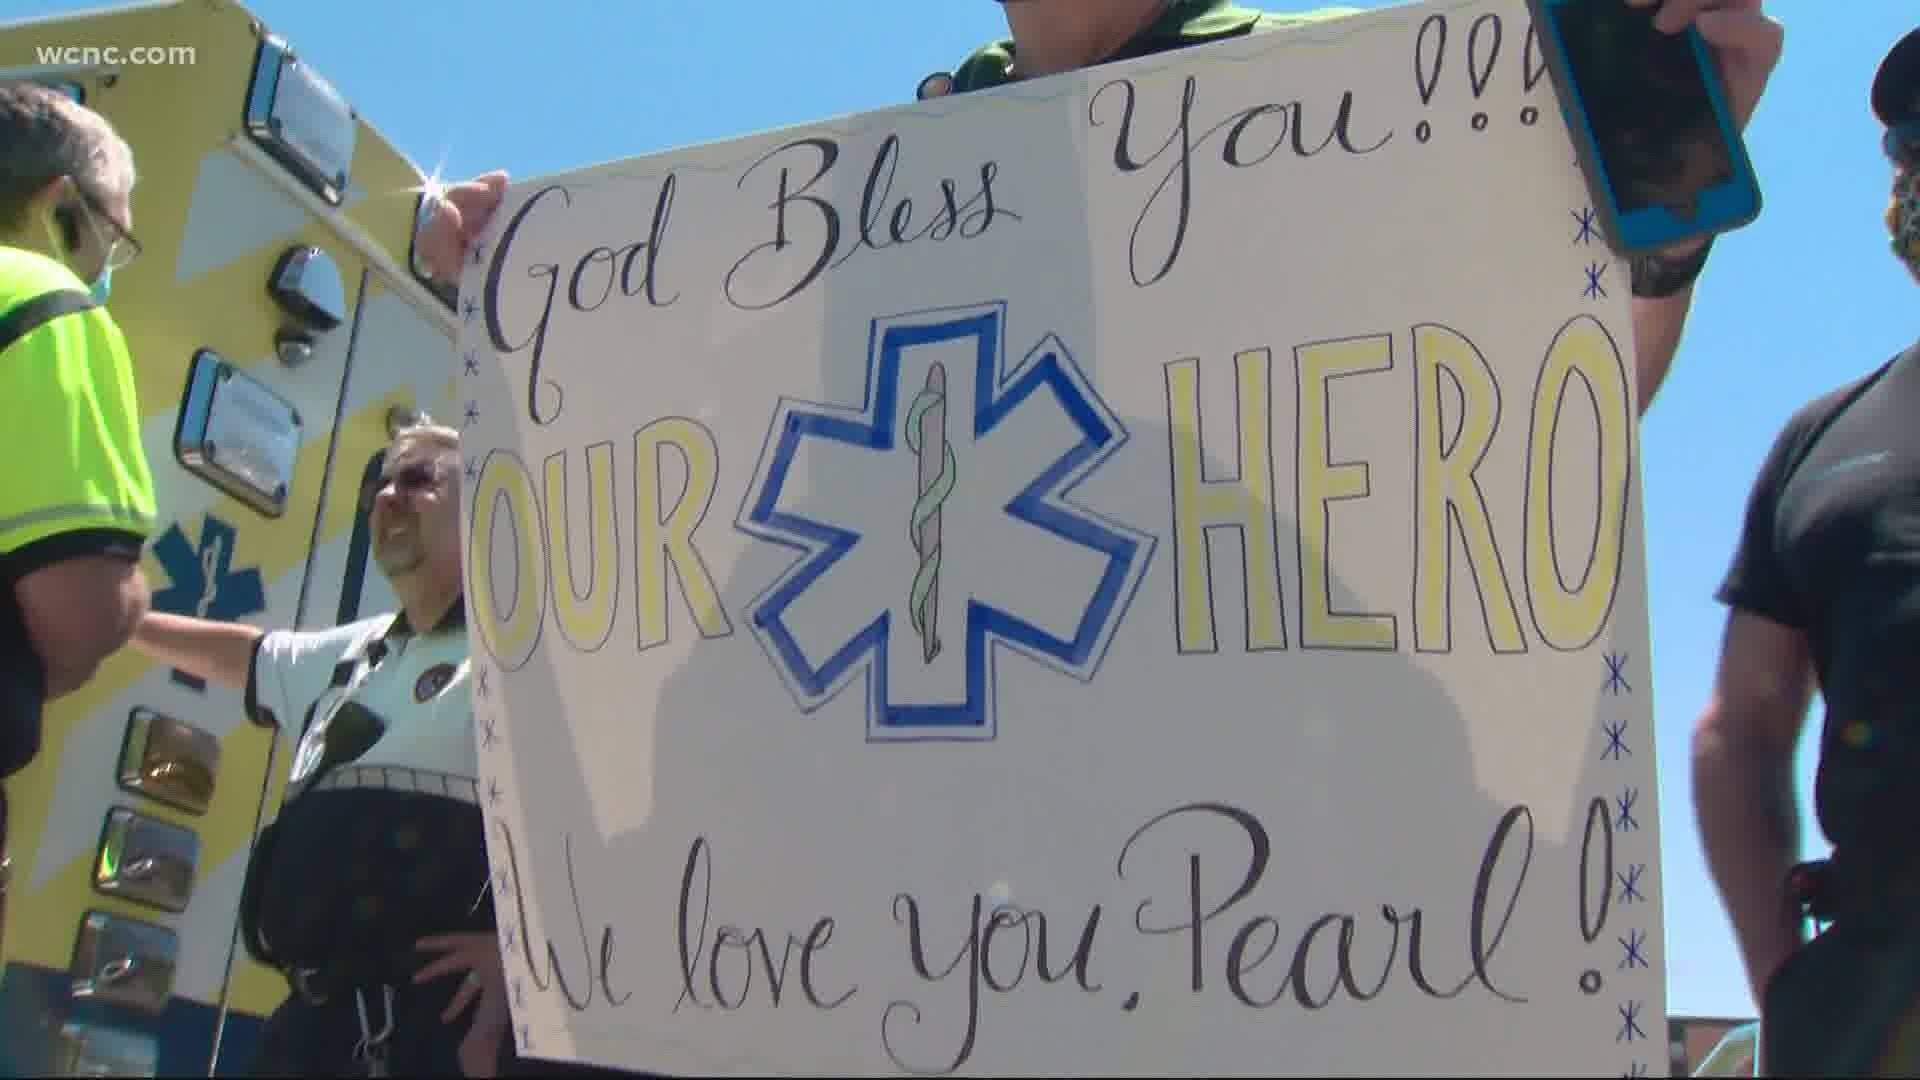 Pearl Lemieux got a proper hero’s sendoff, as she left Piedmont's Encompass Health rehabilitation facility to go home for the first time in weeks.